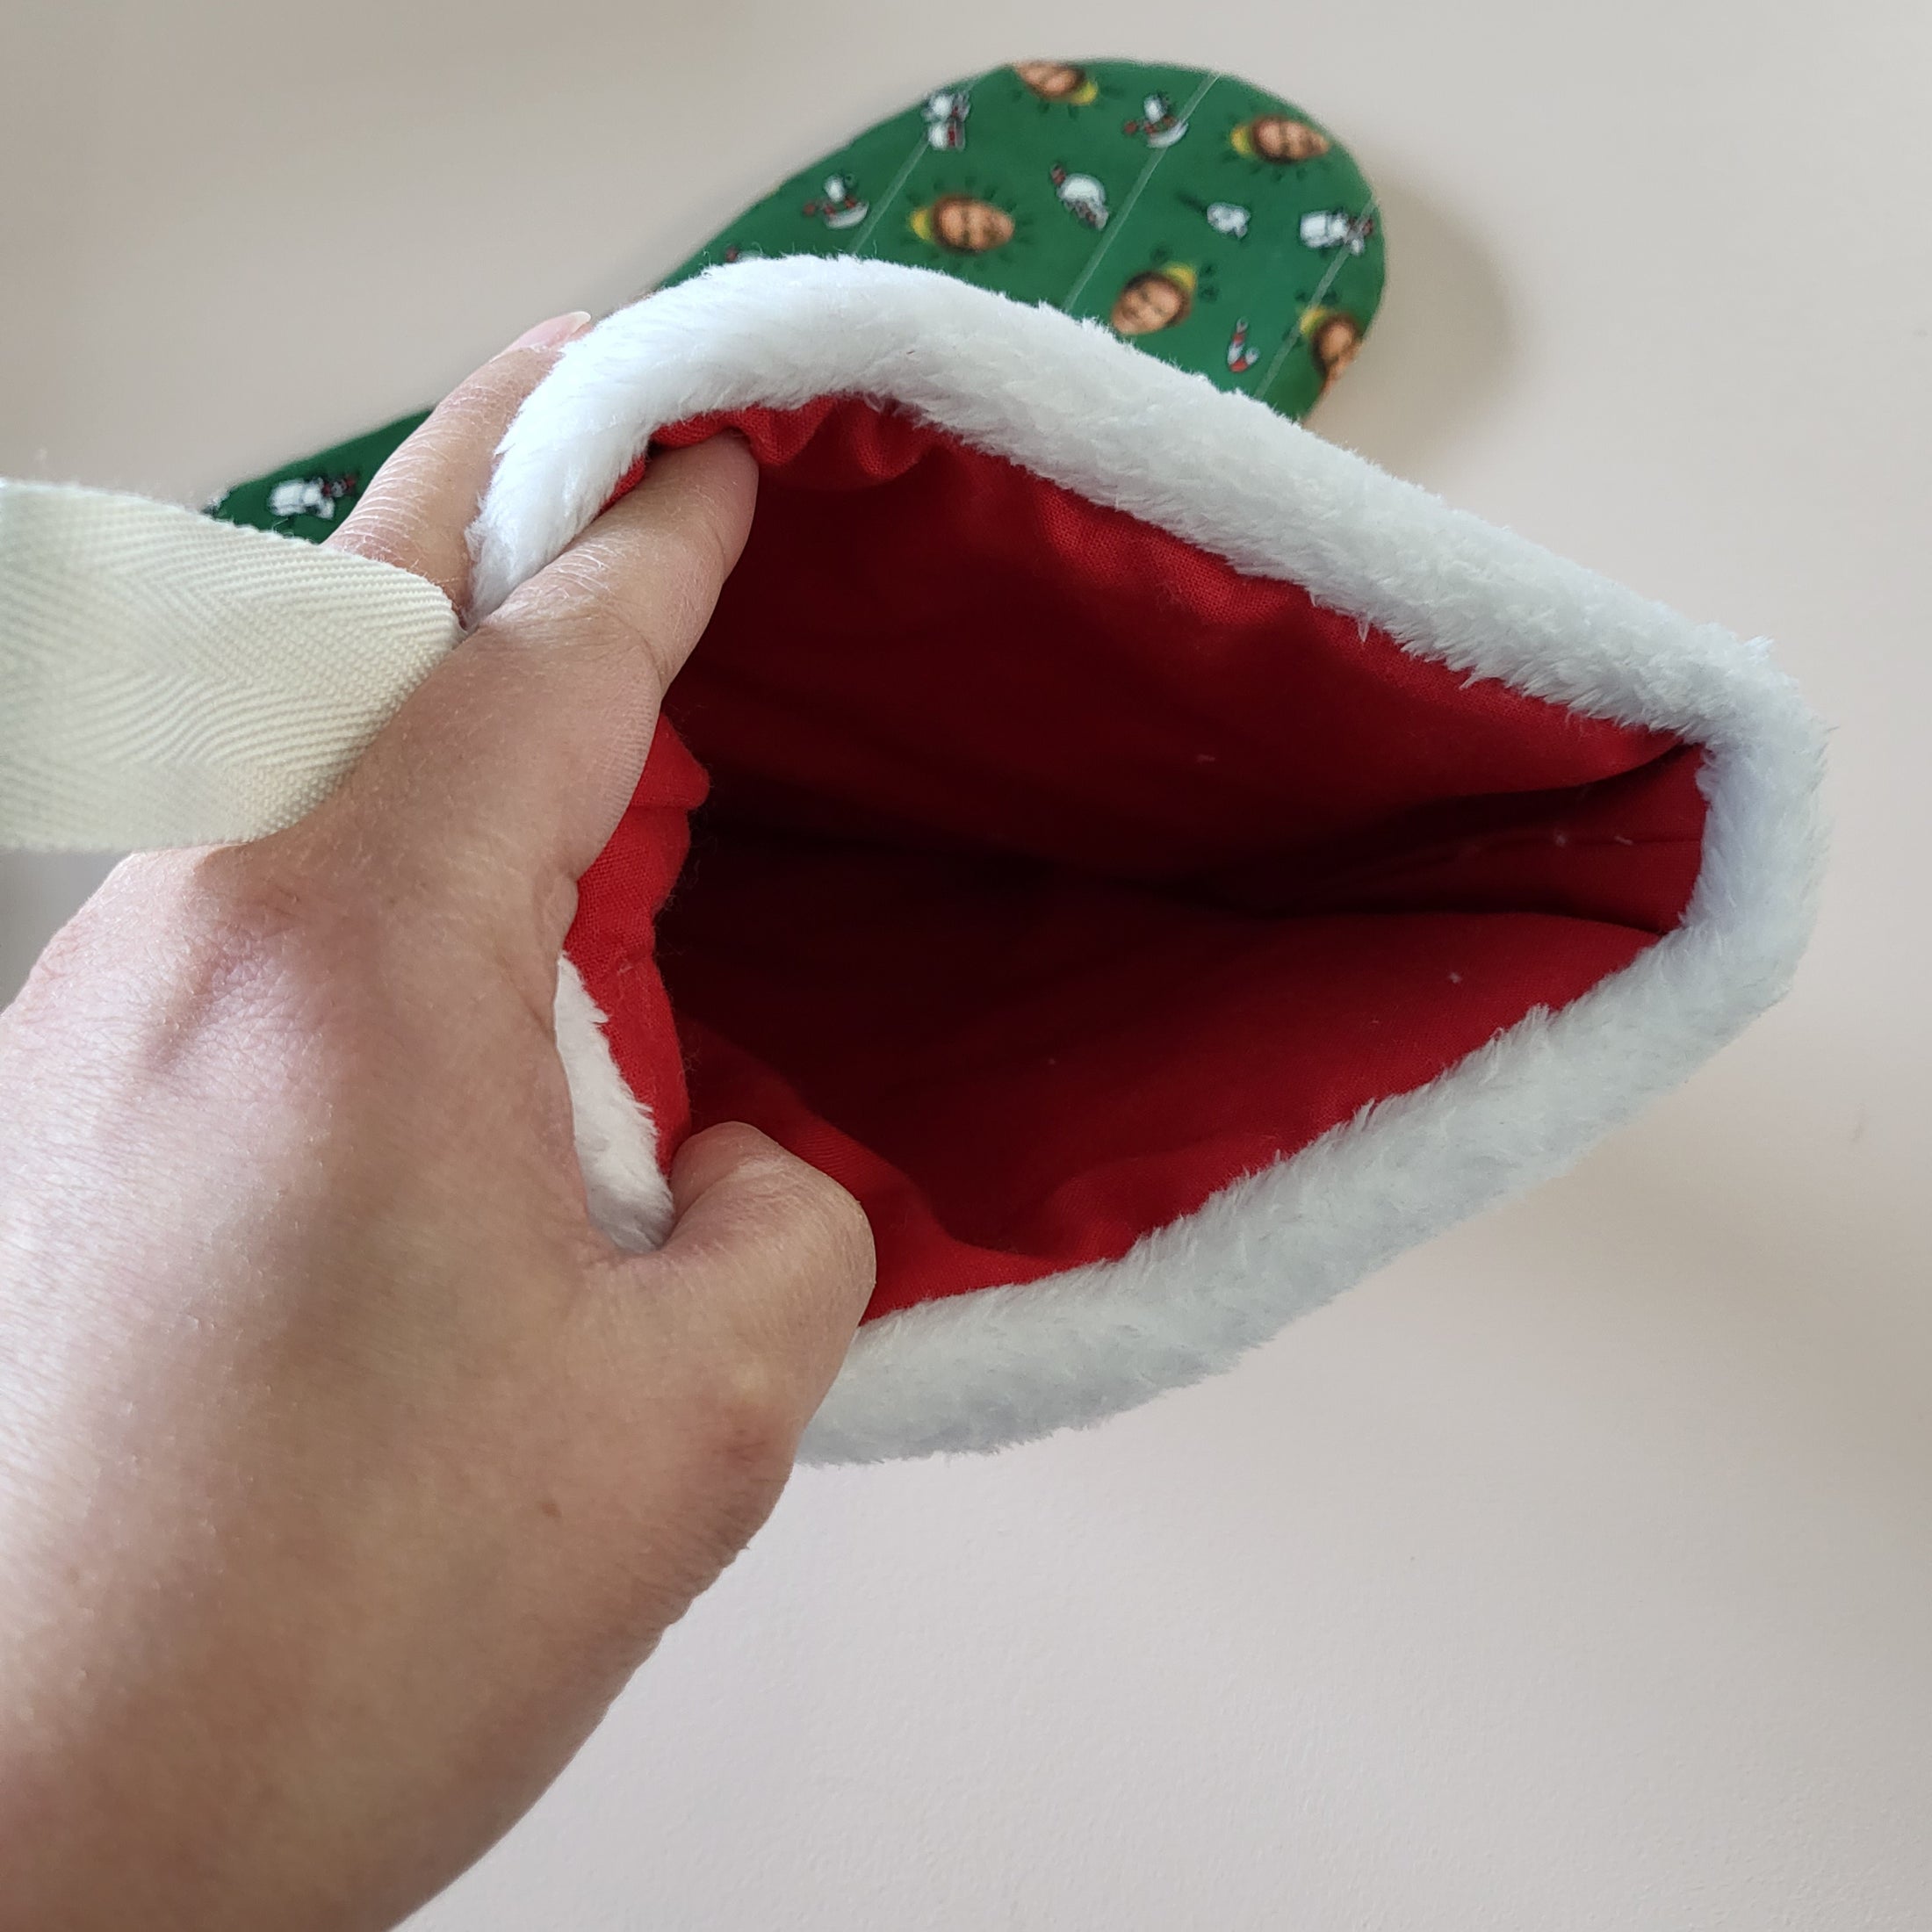 Red interior of the quilted buddy the elf holiday stocking.